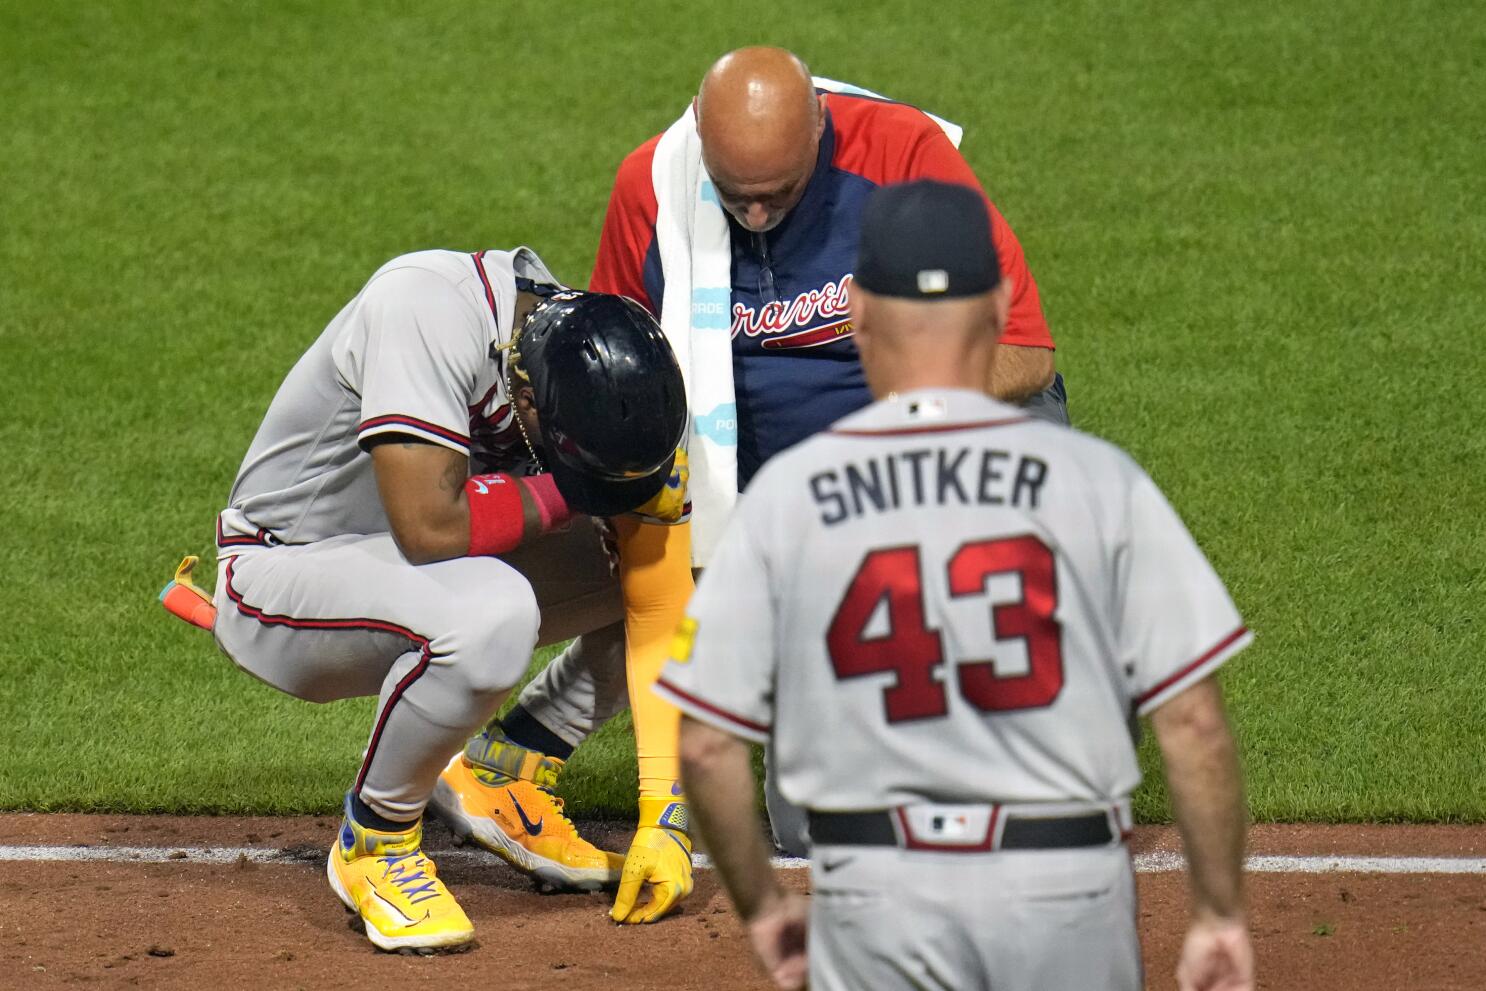 Braves' Ronald Acuña Jr. hit on the left elbow by a pitch, leaves game;  X-rays negative - The San Diego Union-Tribune